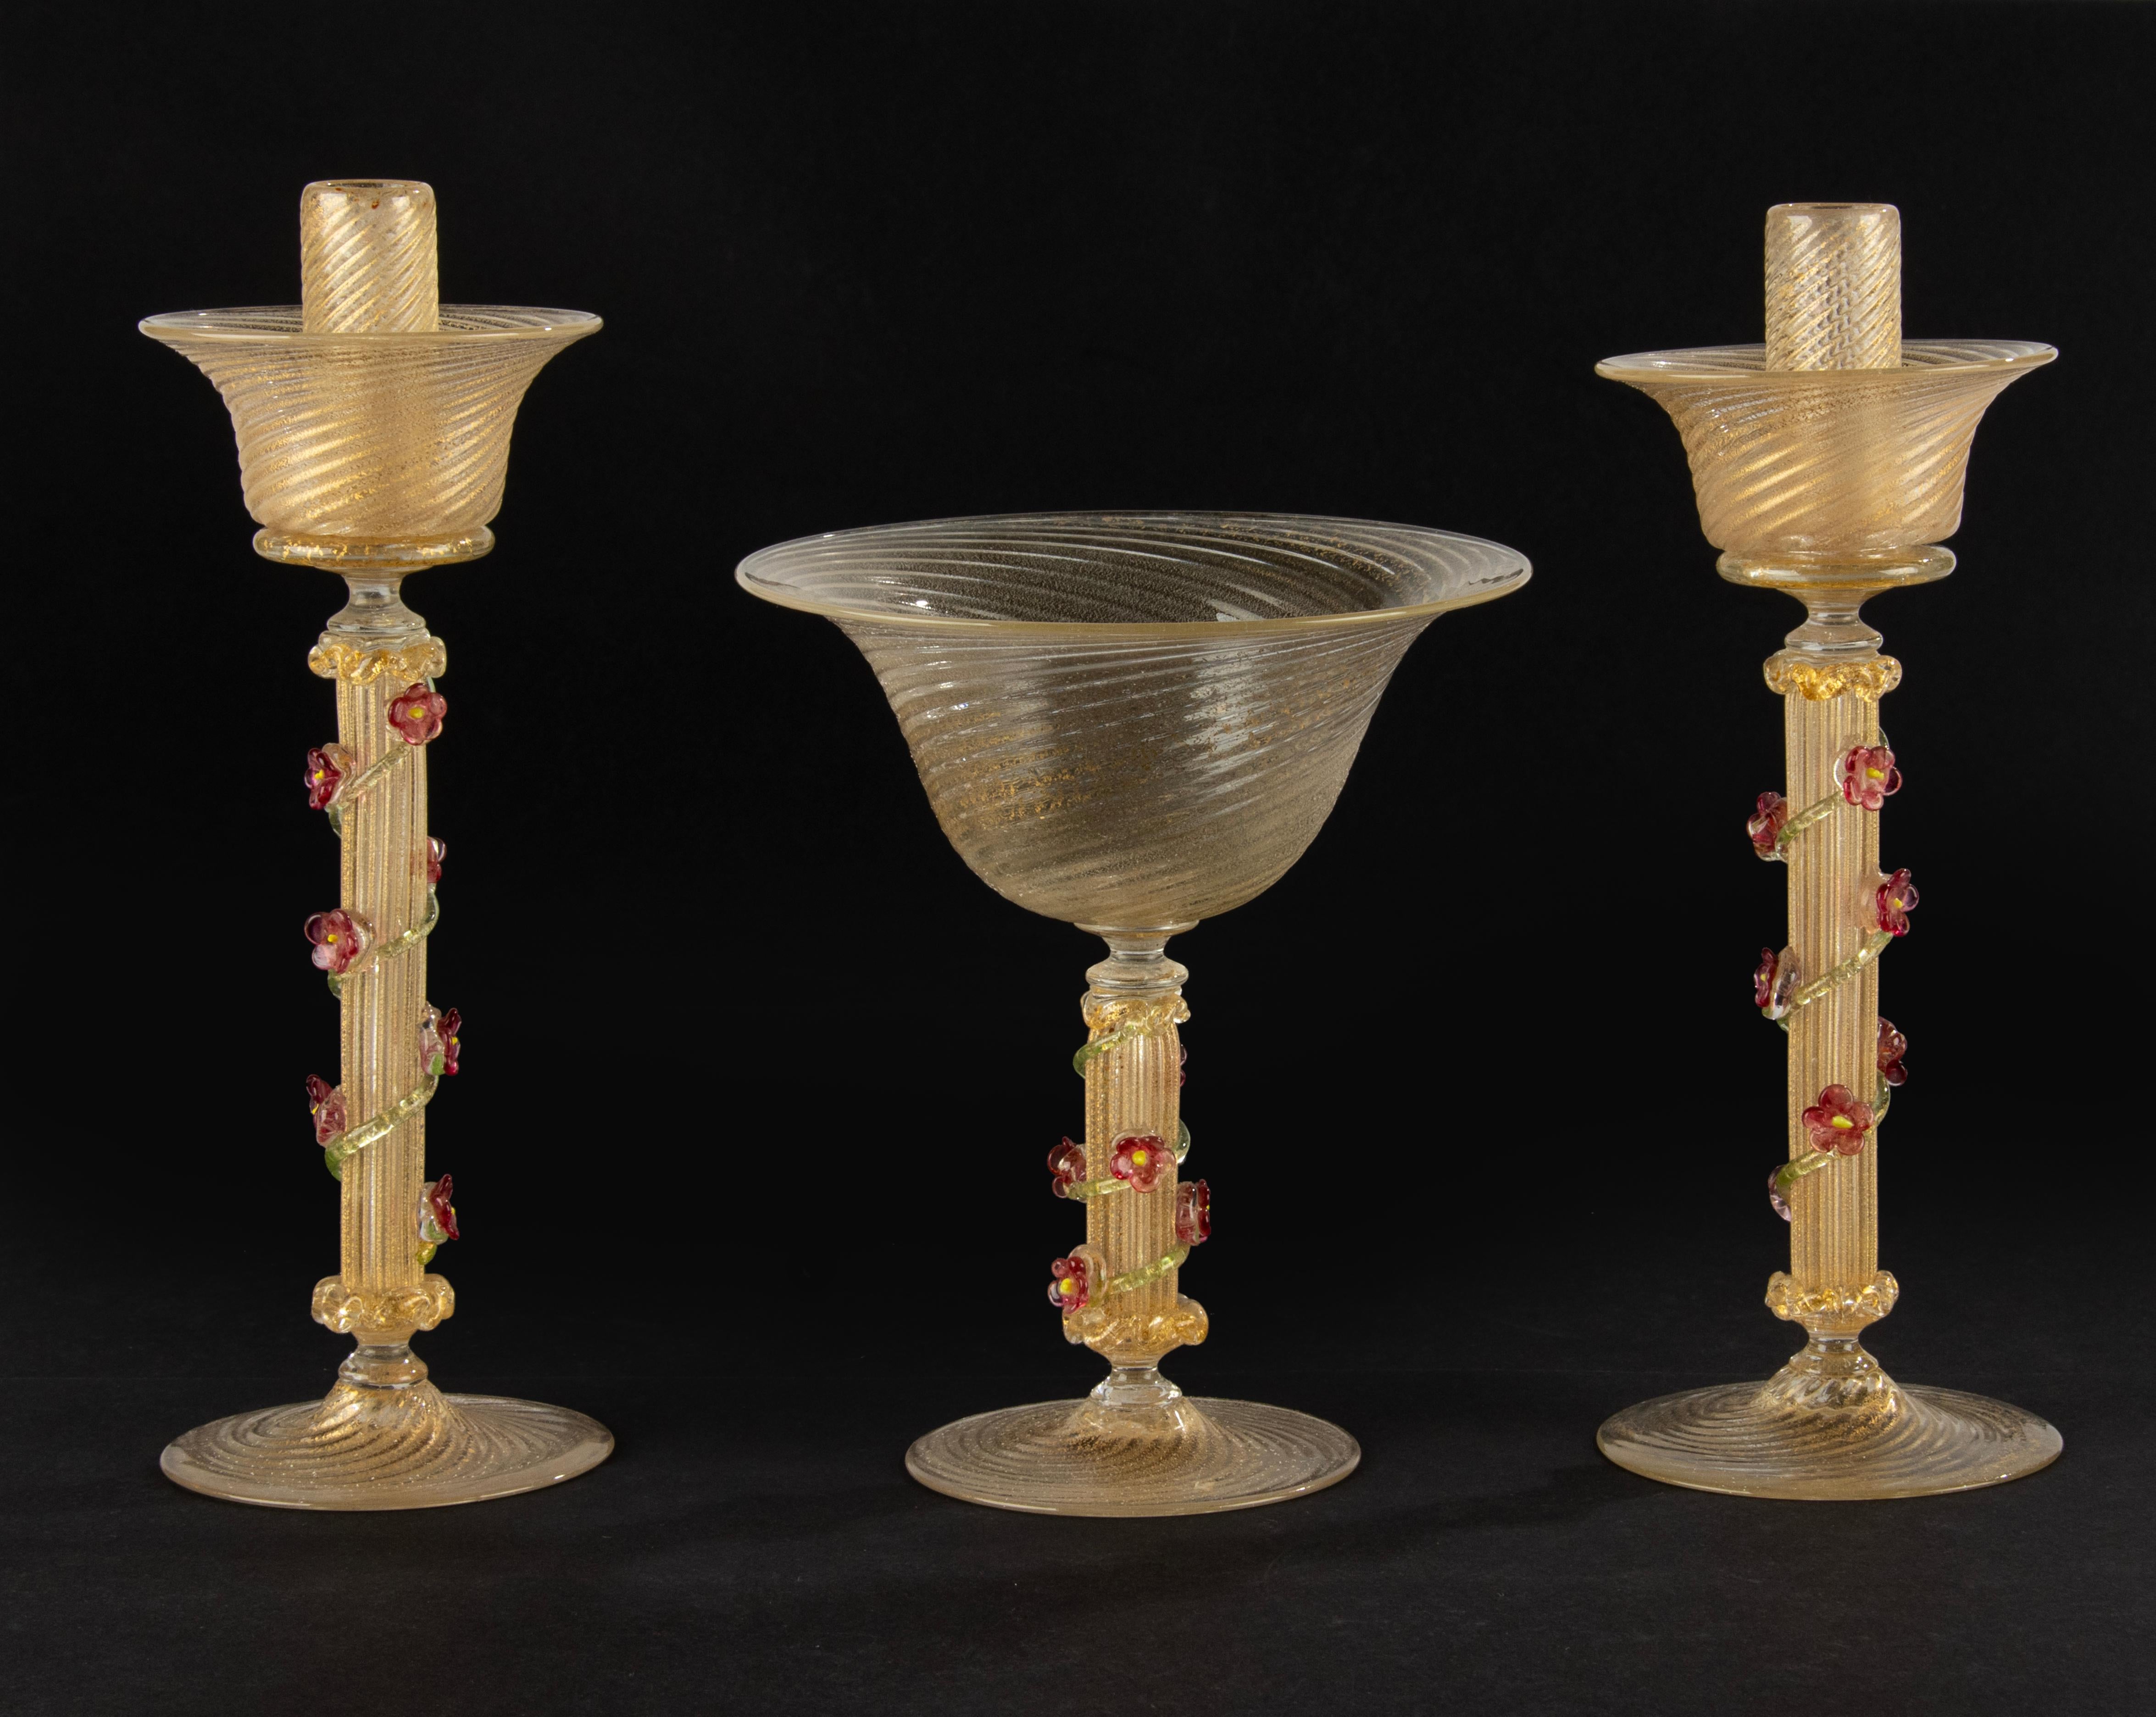 A beautiful set of 2 Murano glass candlesticks and a bowl. 
The glass has beautiful gold colored inclusions, the stems are decorated with delicate flowers. 
Dimensions: the candles are 26 cm tall and Ø9 cm, the bowl is 18 cm tall and Ø15 cm. 
All